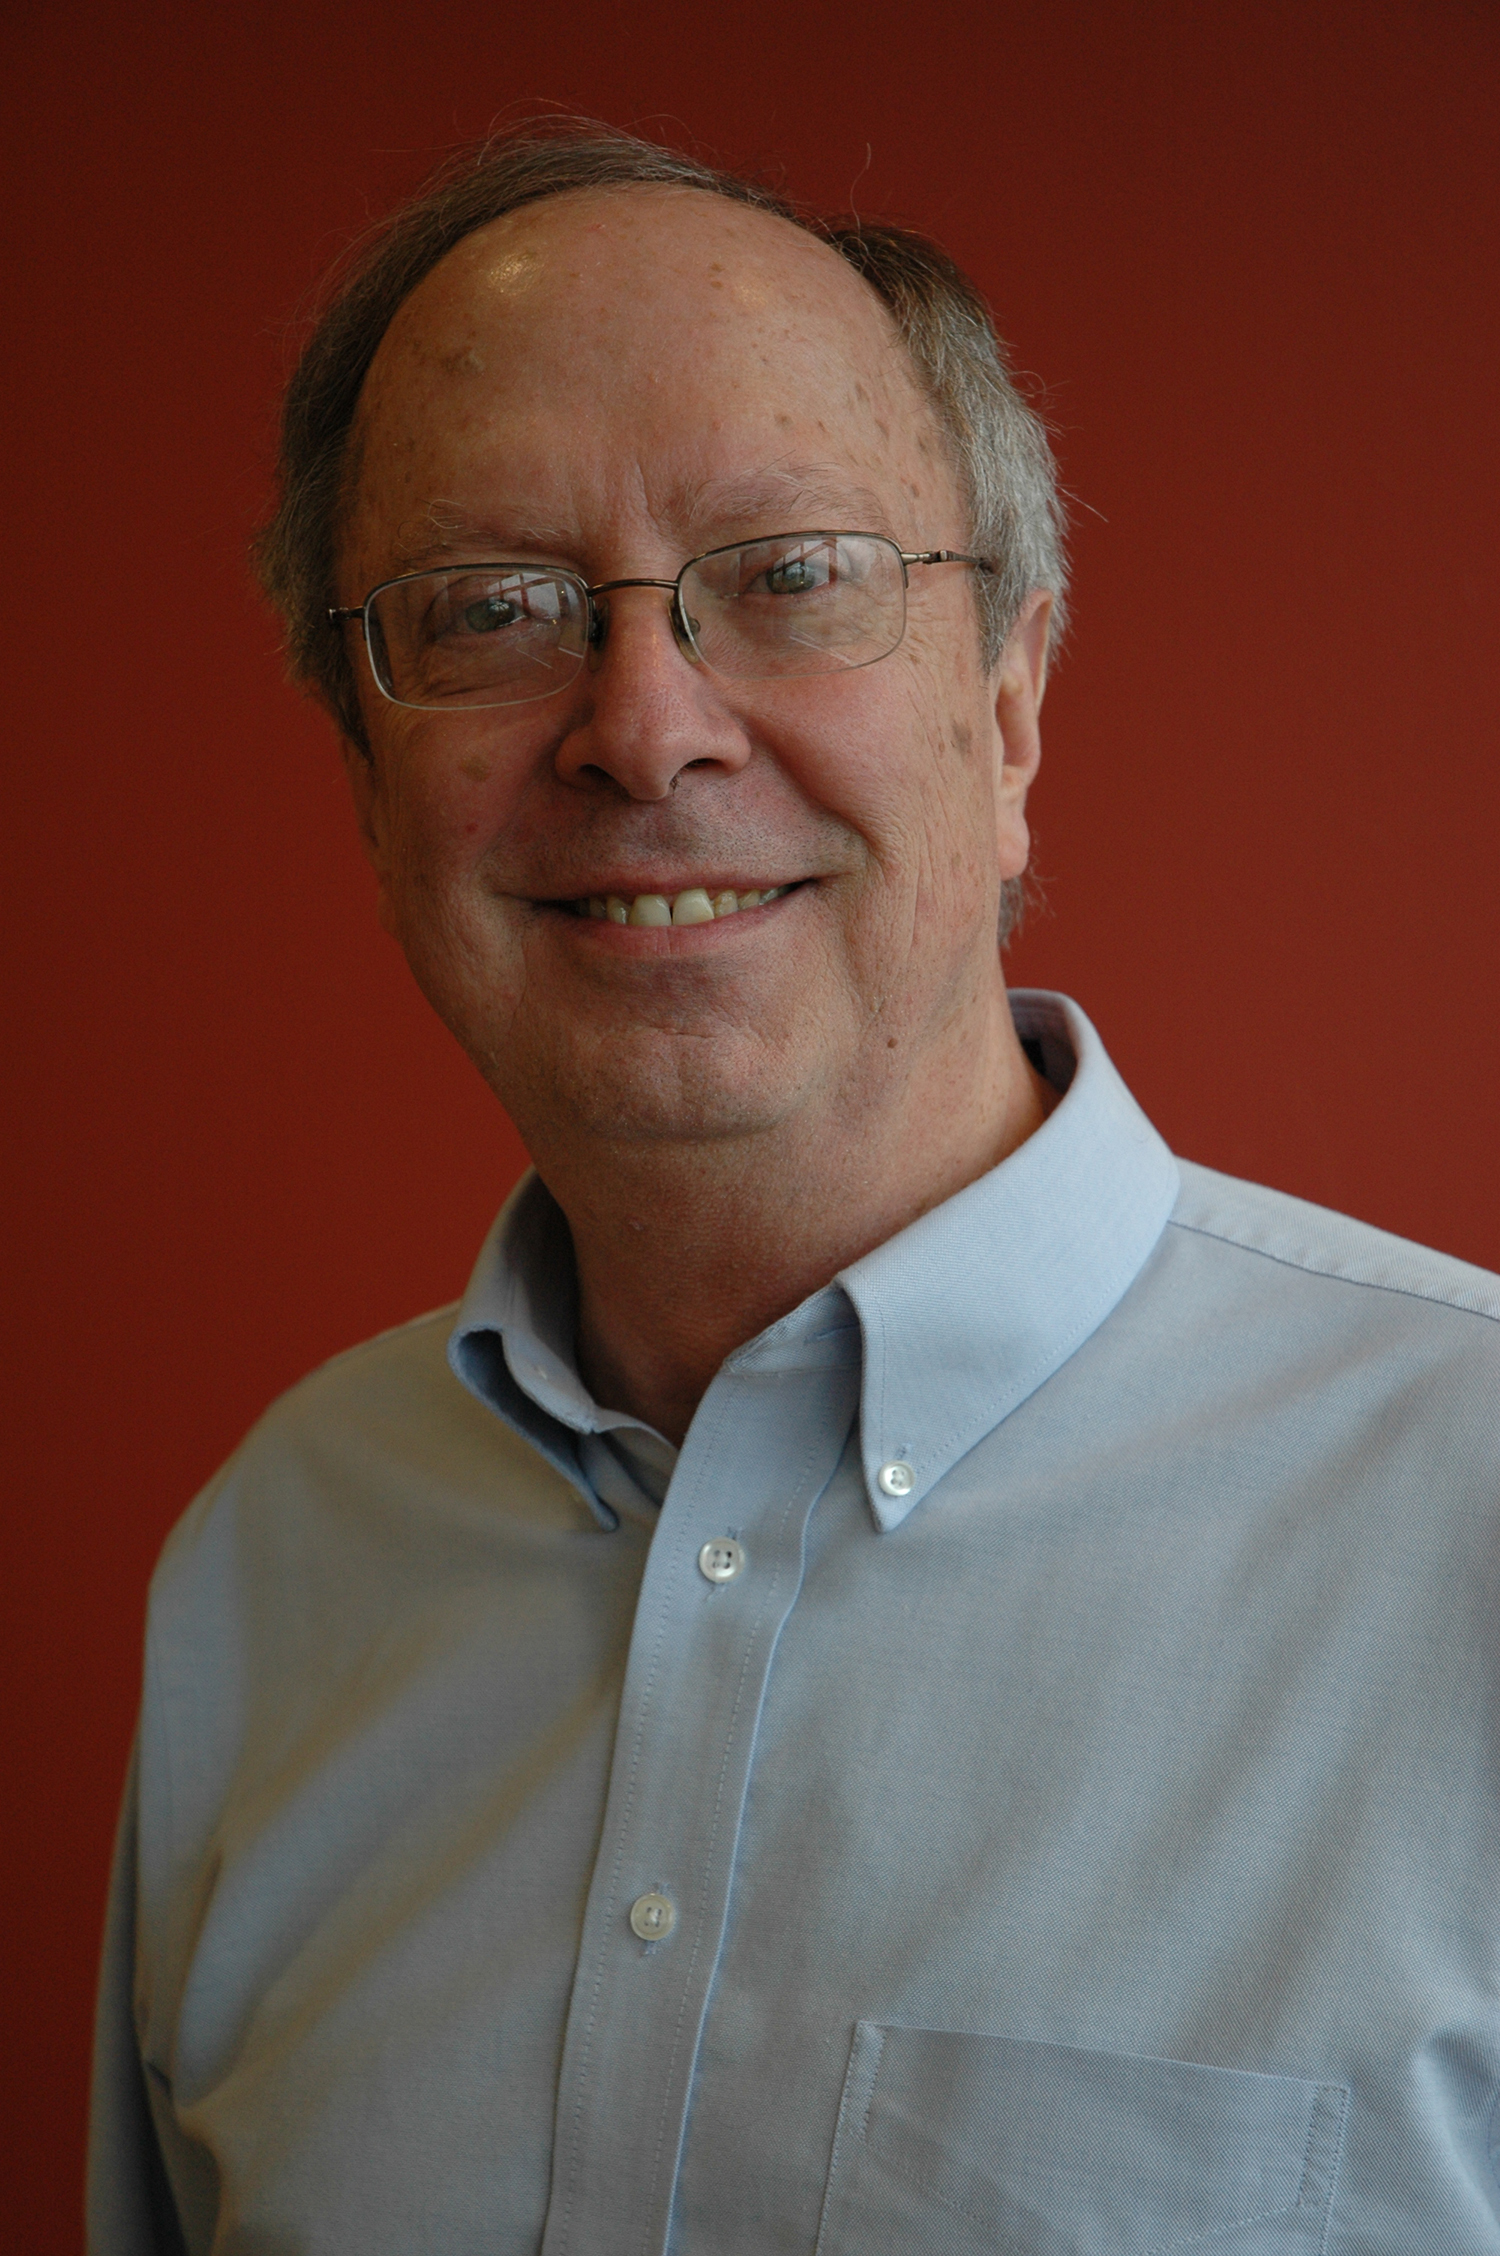 Photo of Bill Bengston with a reddish background